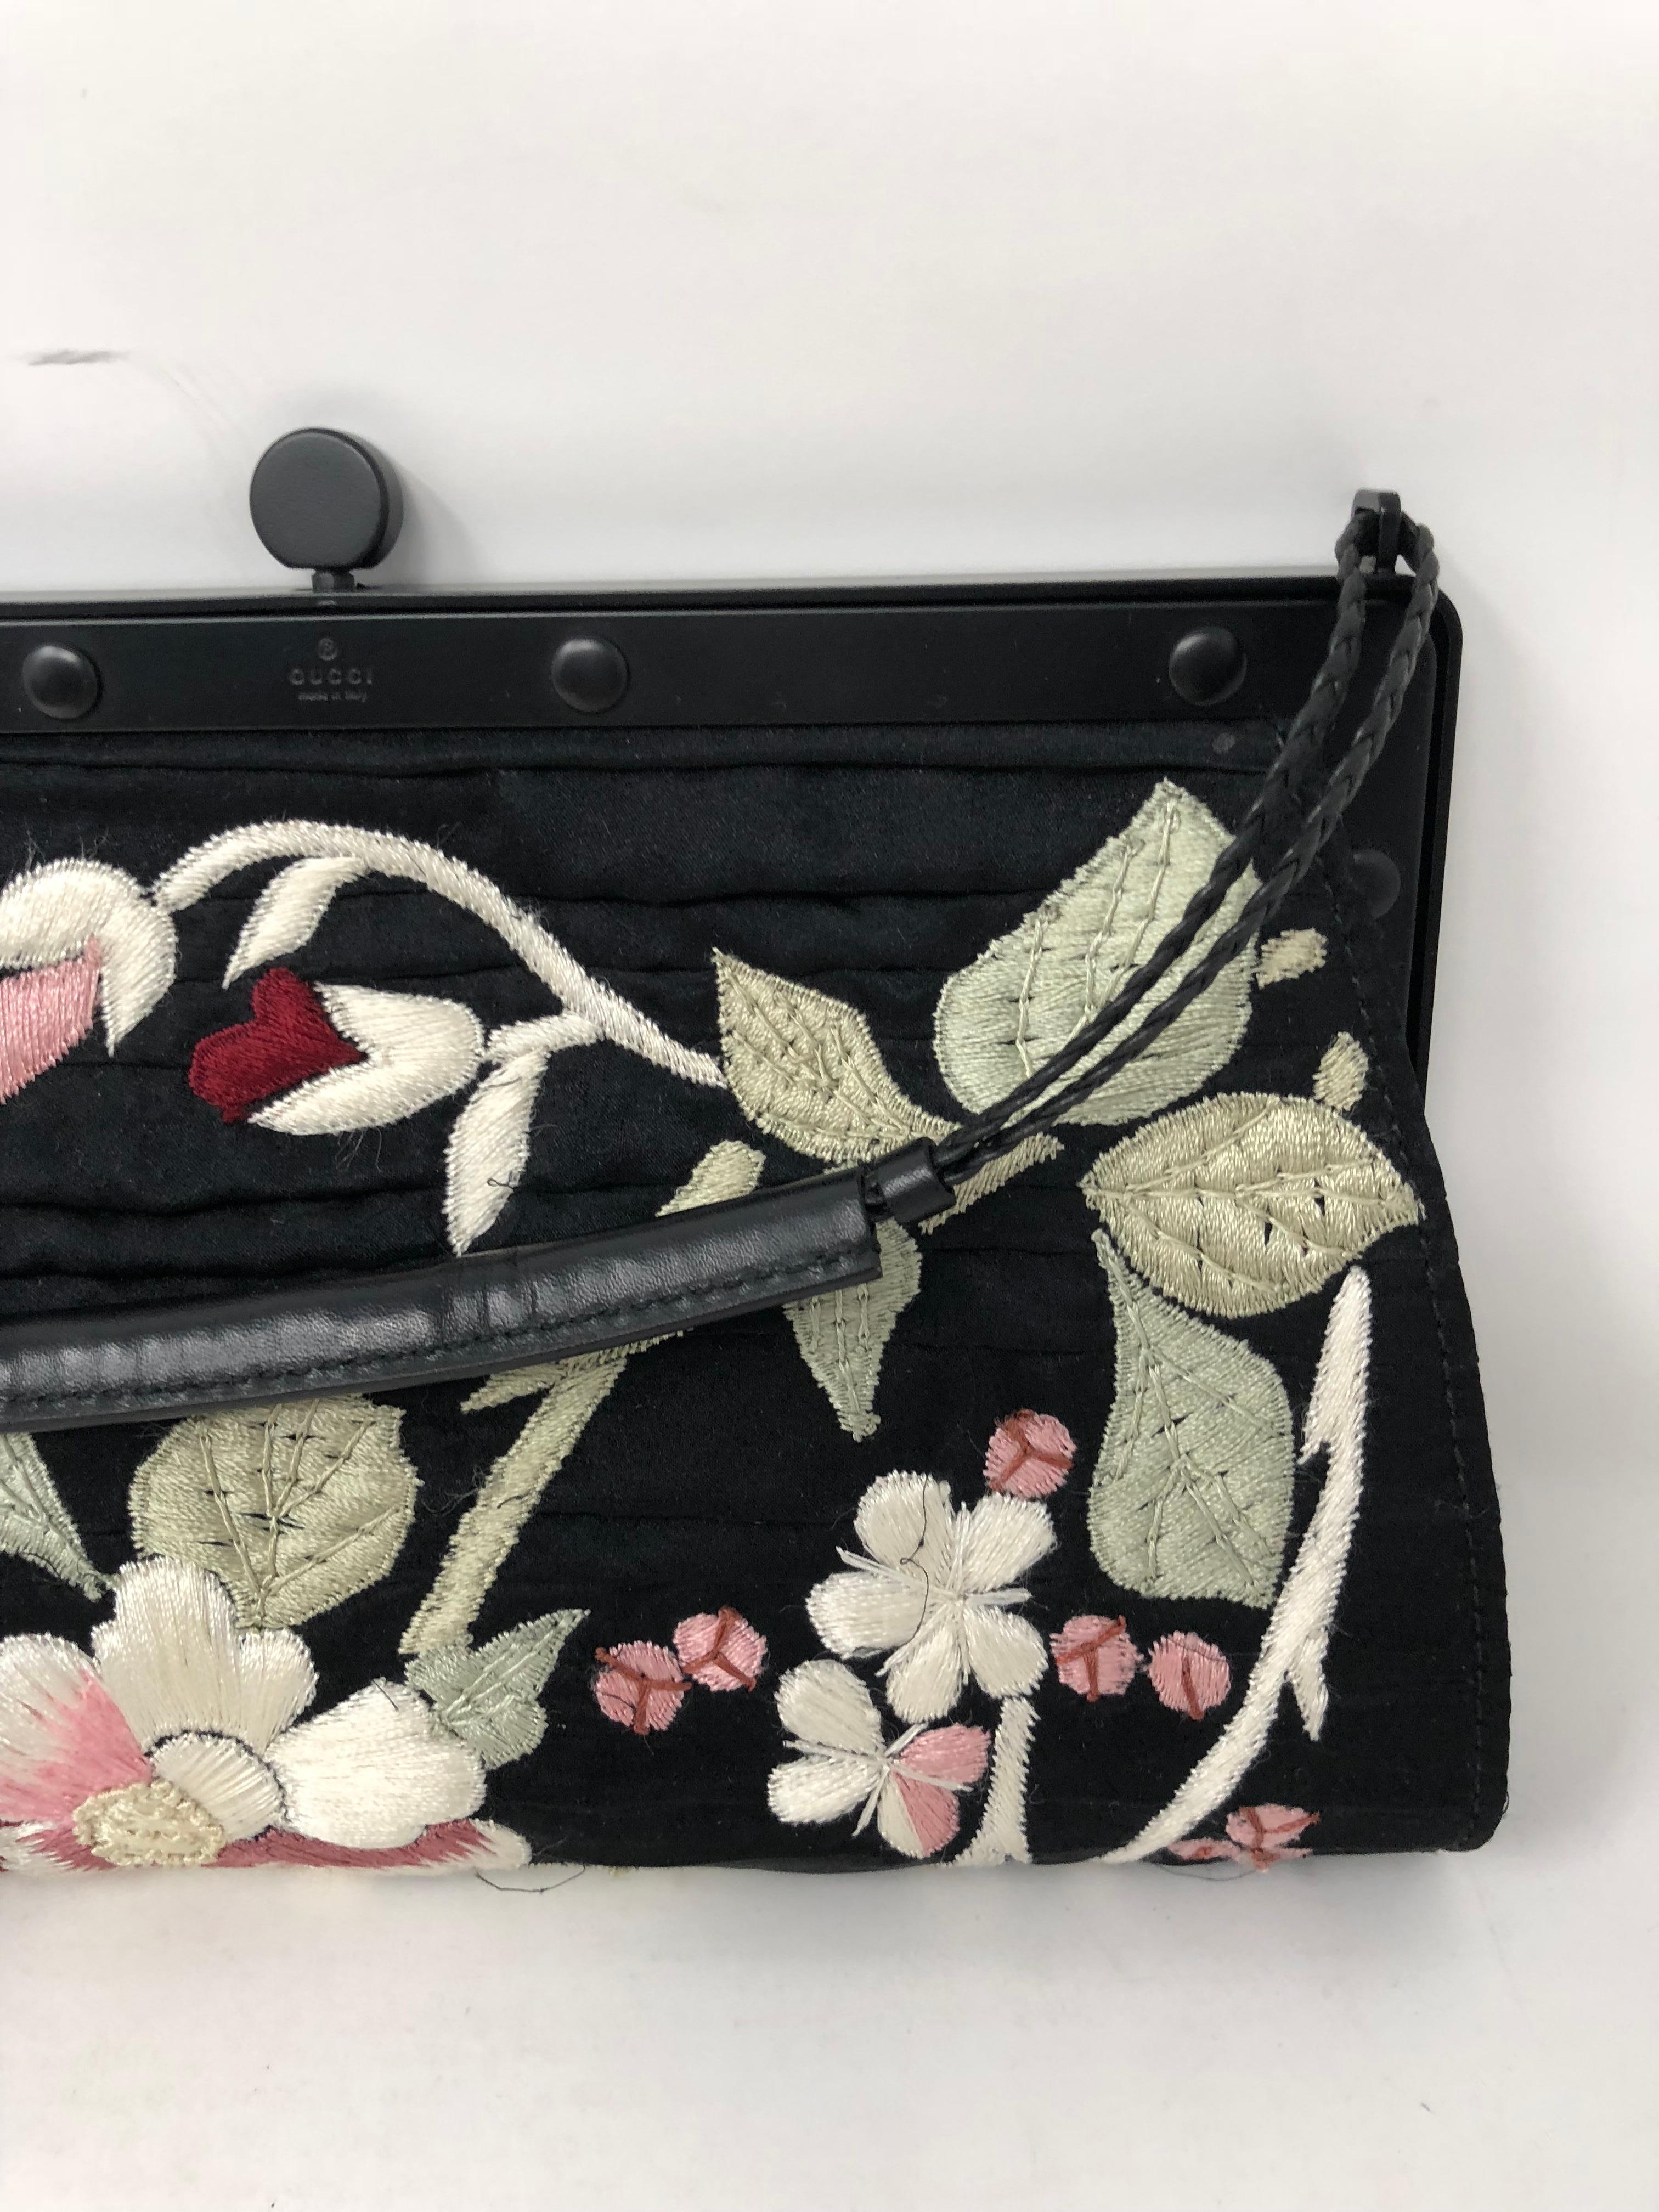 Gucci Hand-stitched embroidered evening bag in black satin. Tom Ford designed for Gucci. Never worn in mint condition. Guaranteed authentic. 